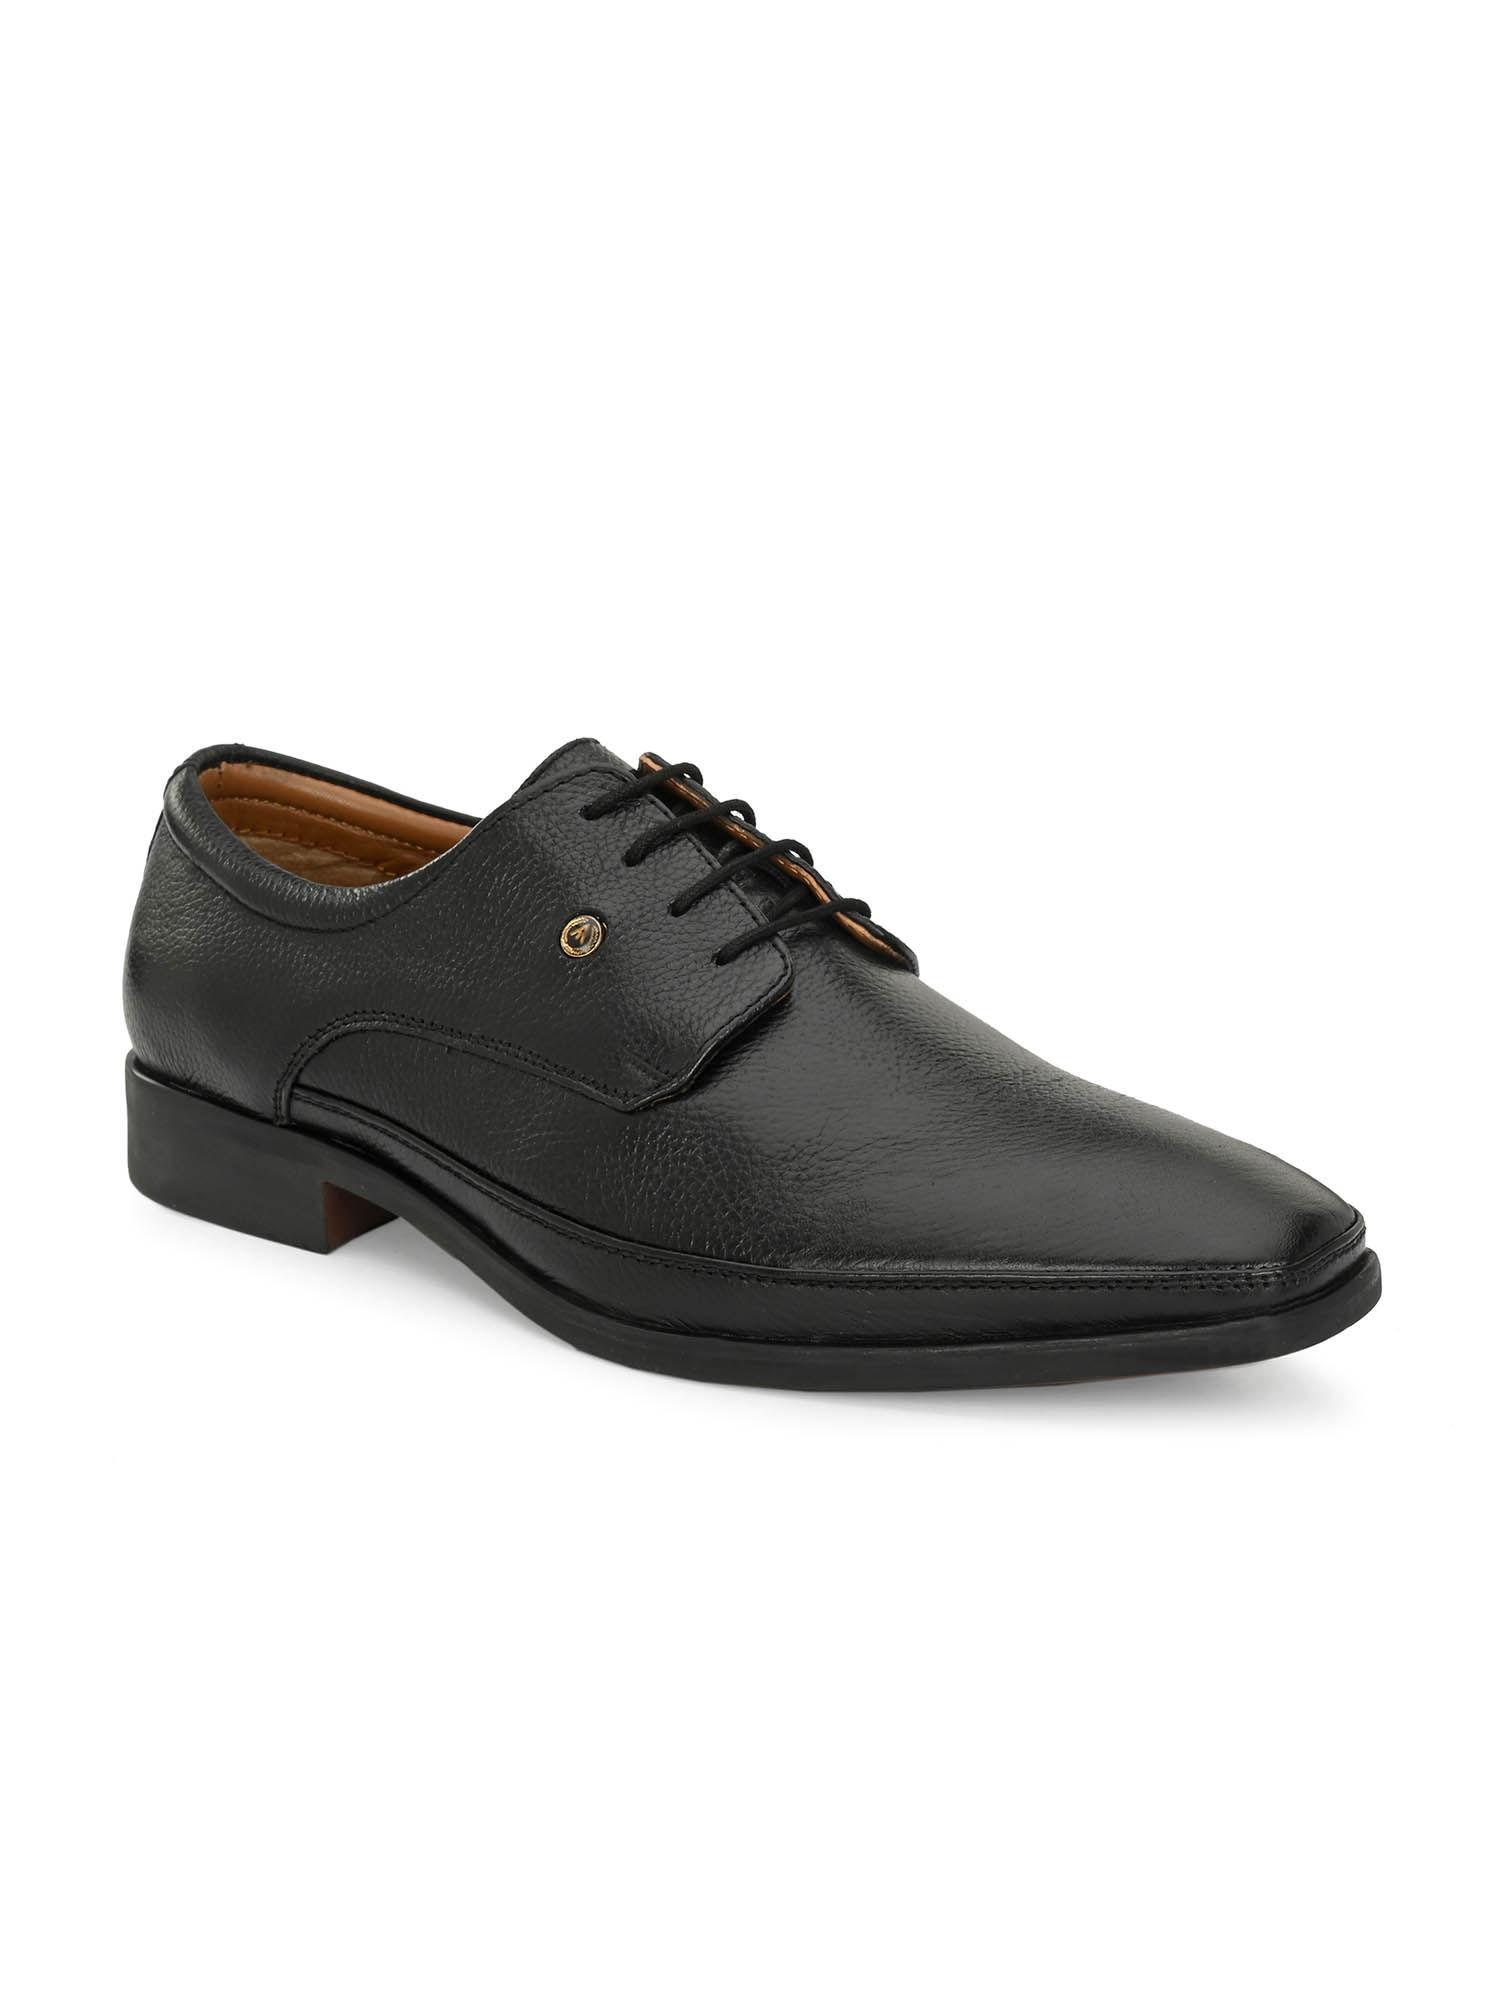 genuine-leather-black-laceup-formal-shoes